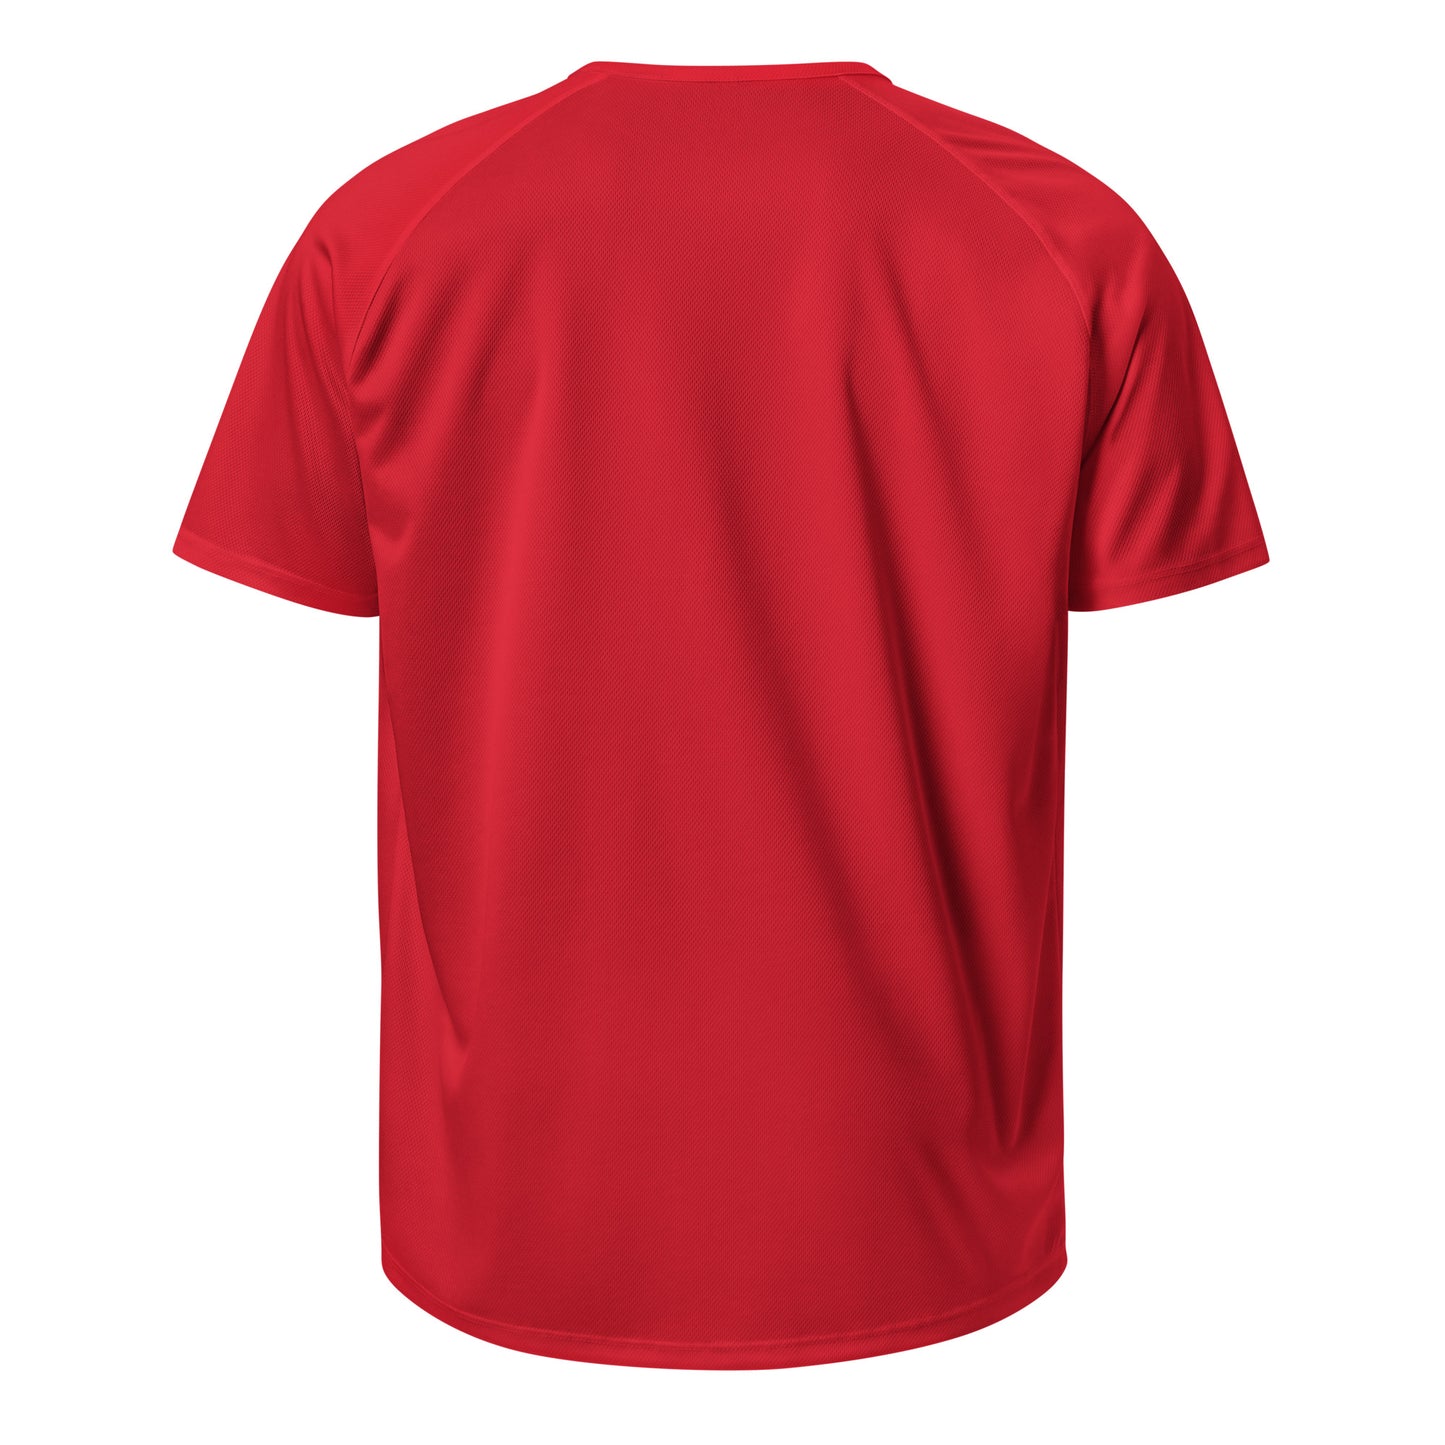 E114 - Sports/Breathable Fabric (Universal jump : Red)